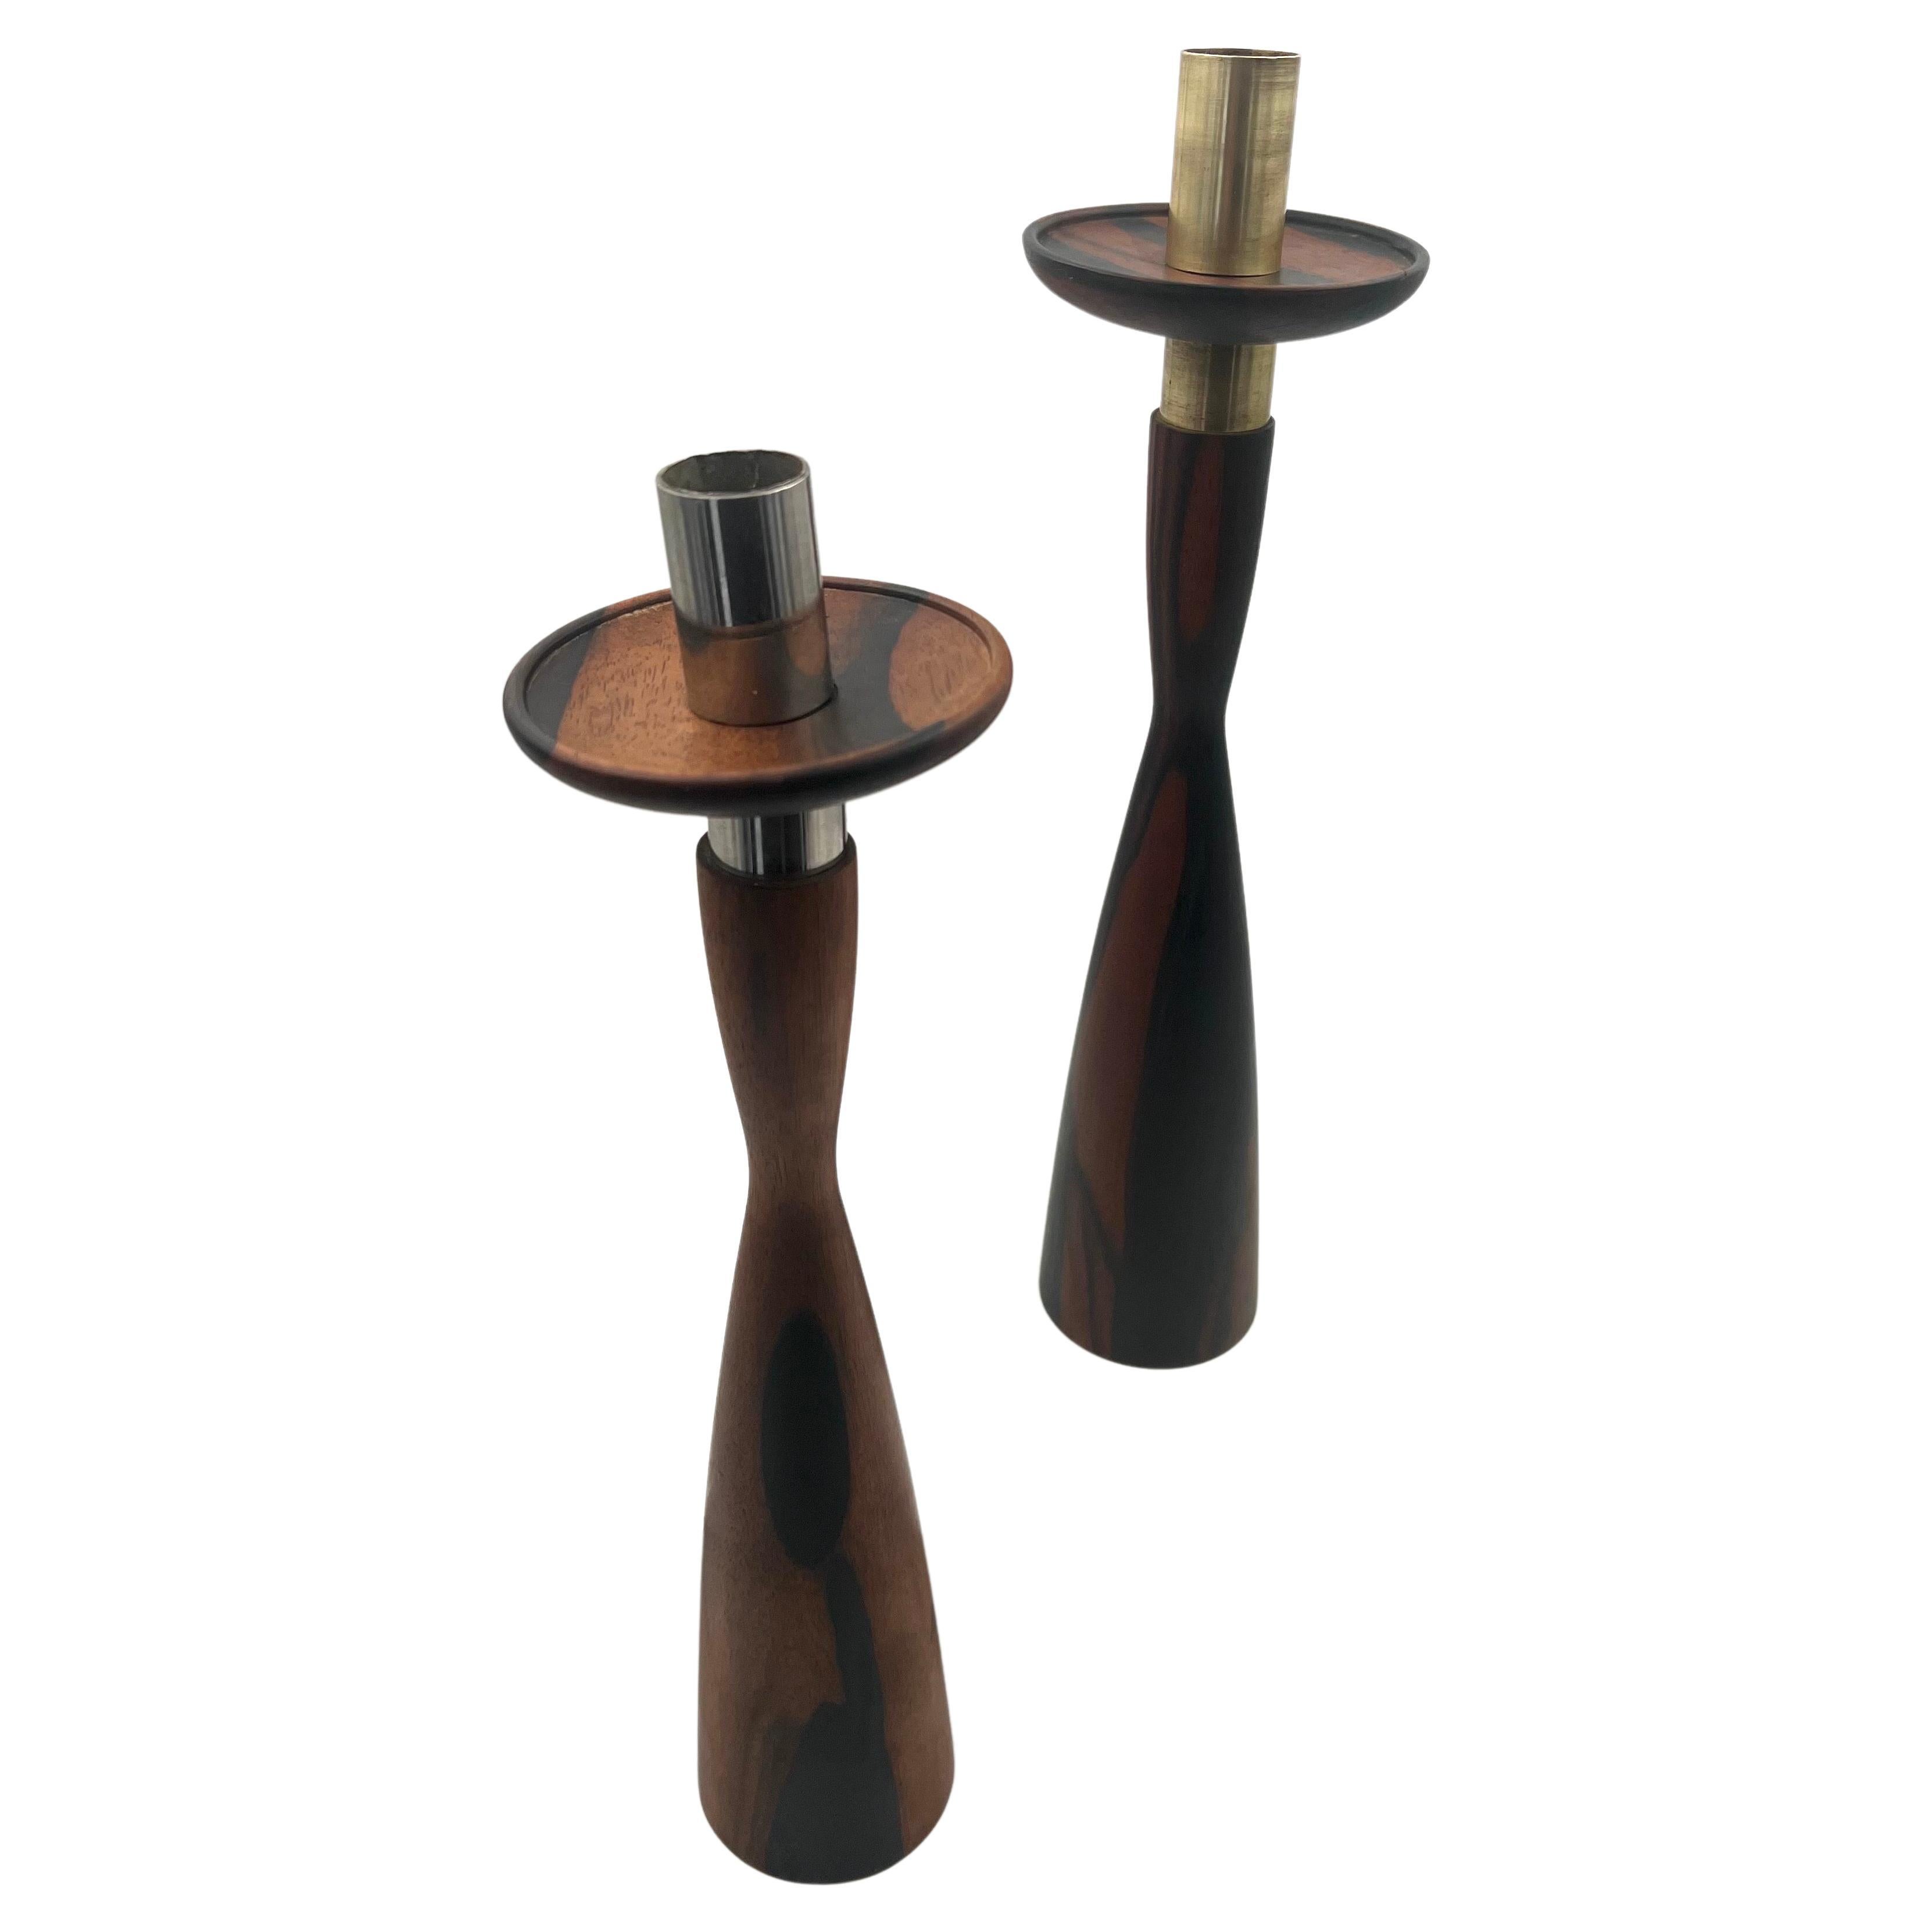 Incredible tall pair of hand-turned candle holders with brass, fittings the grain on the wood its beautiful one shows a brass fitting, and the other a chrome fitting.